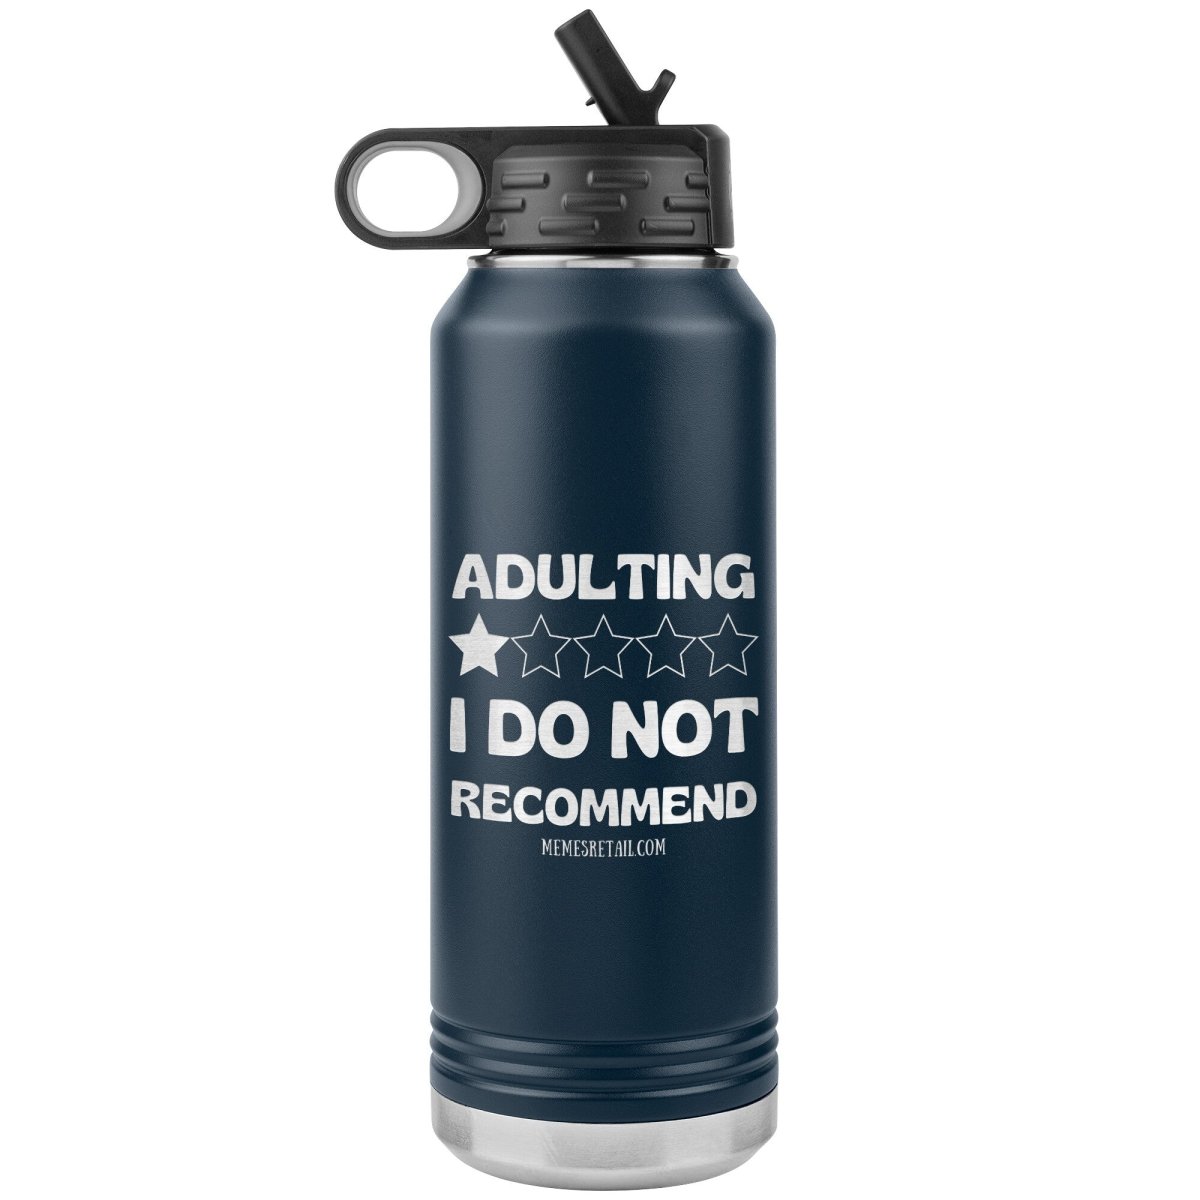 Adulting, 1 Star, I do not recommend 32oz Water Tumblers, Navy - MemesRetail.com